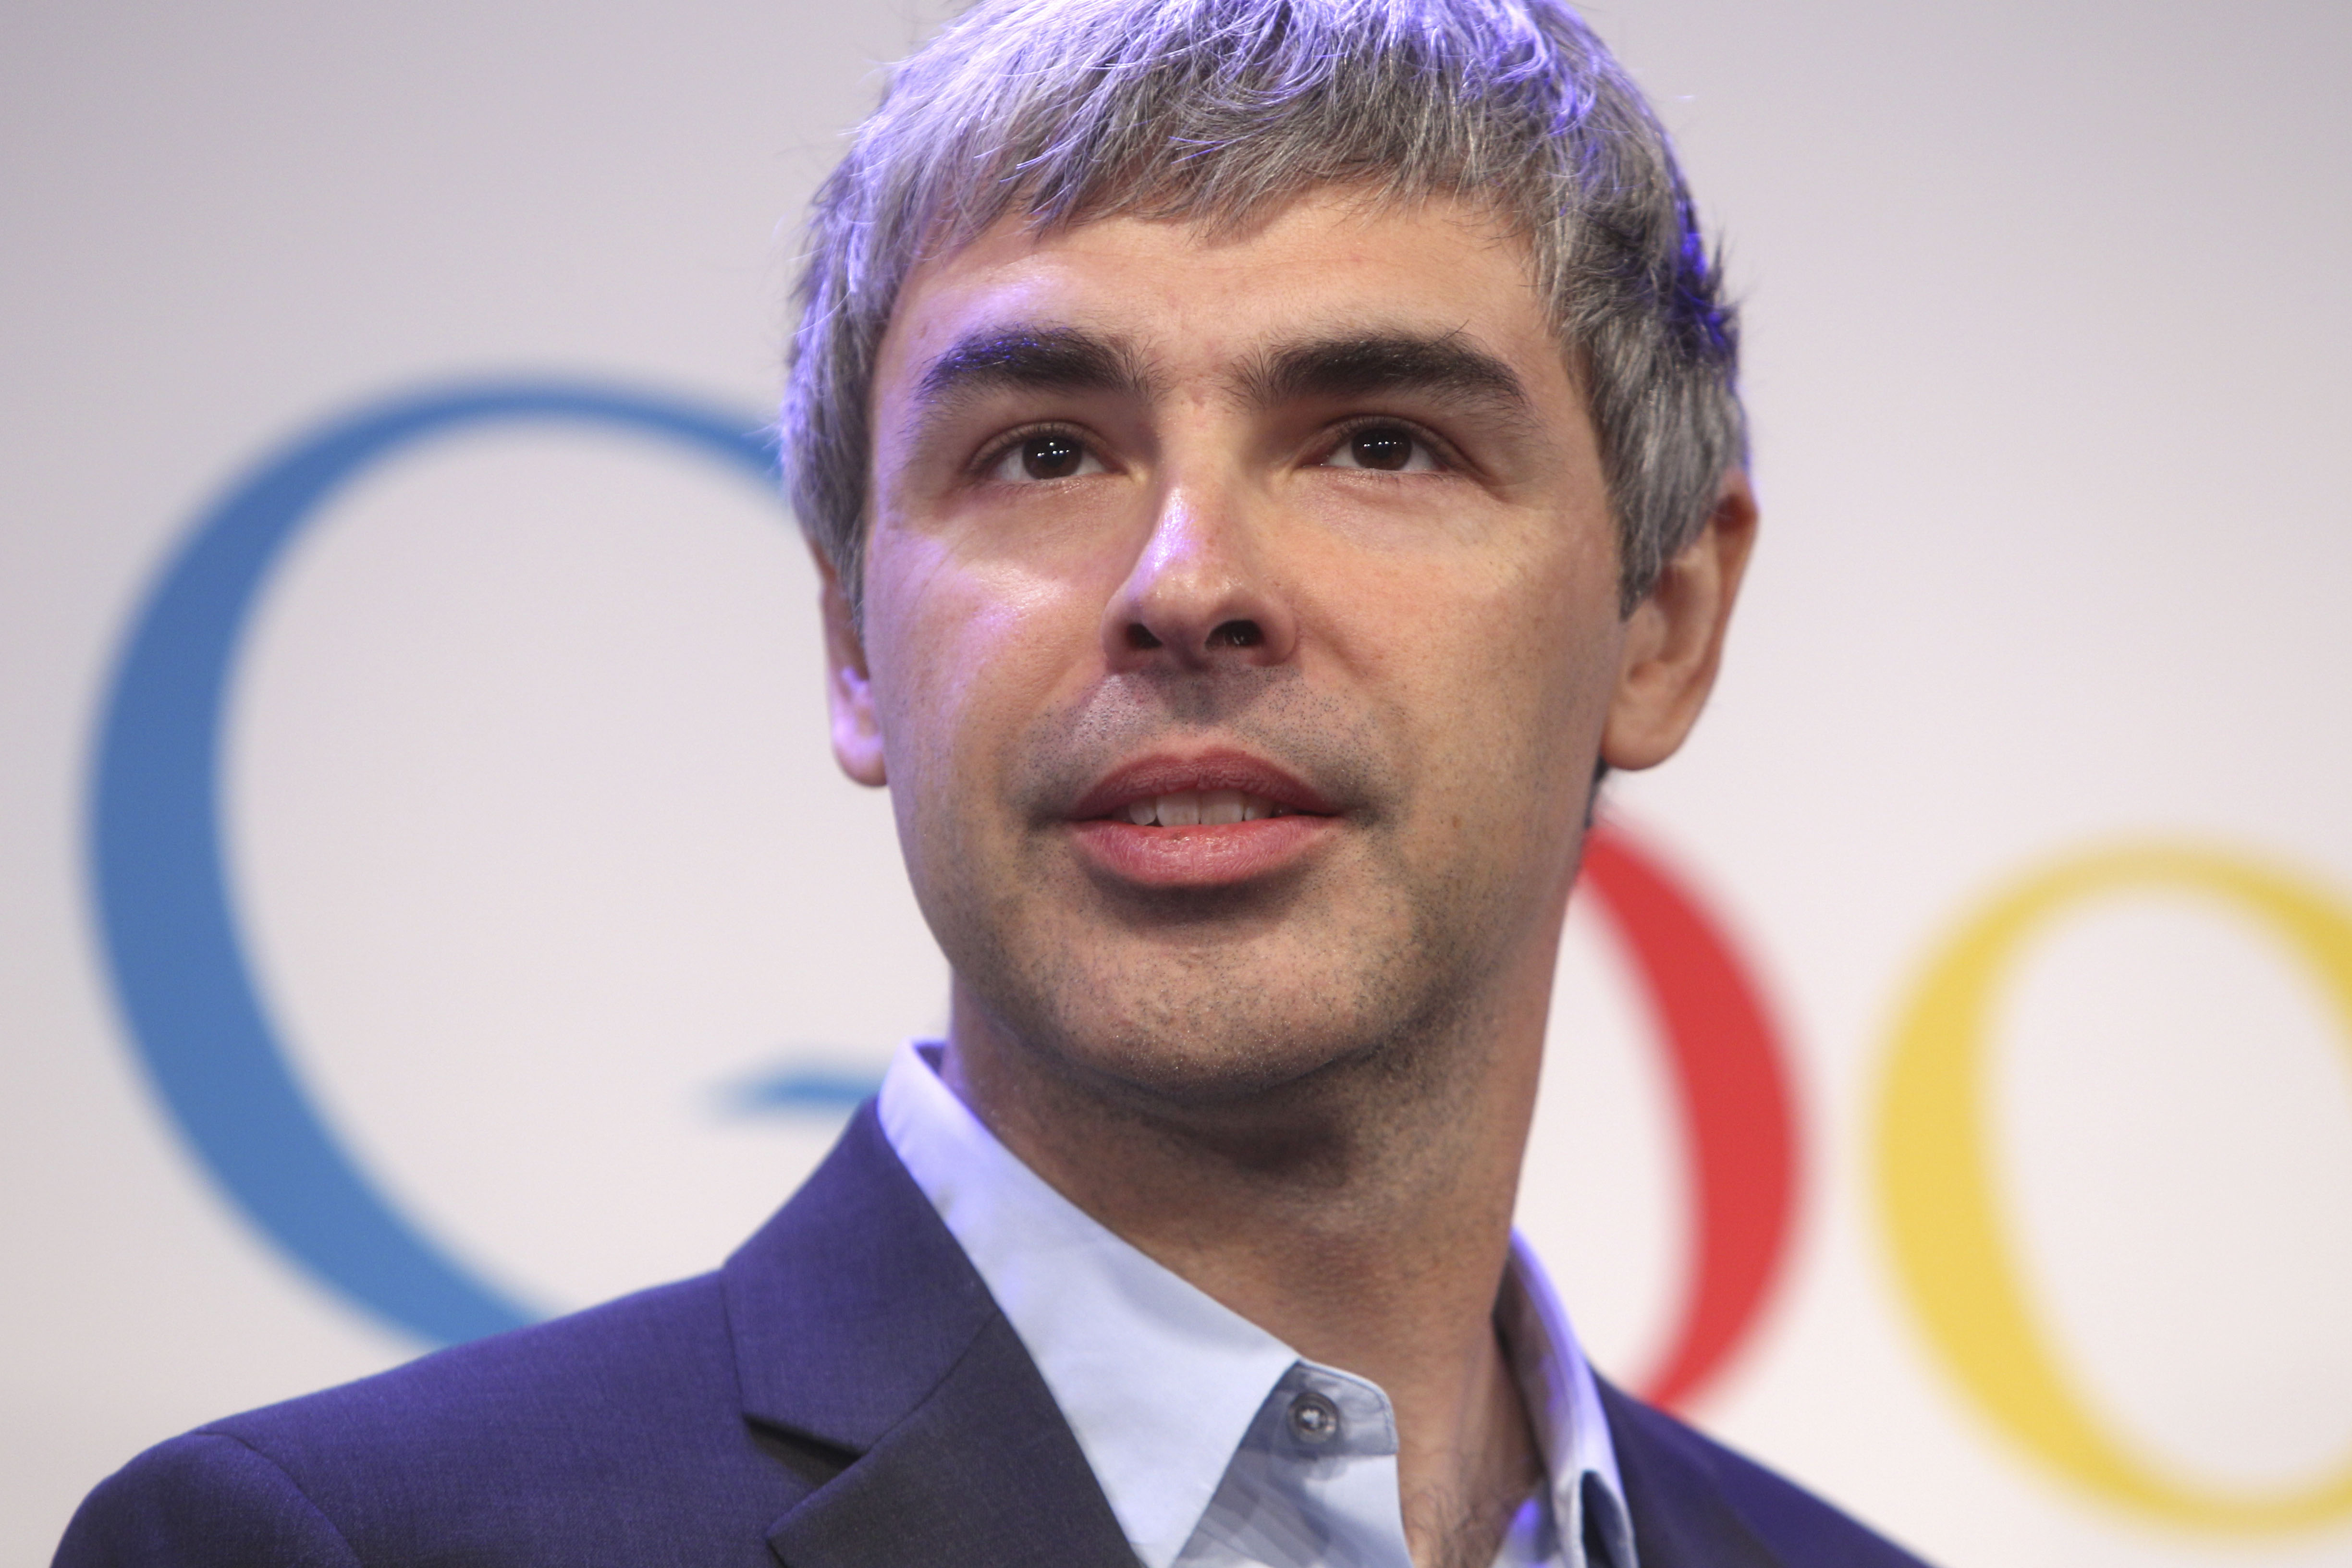 Google CEO Larry Page speaks at a news conference at the Google offices in New York, Monday, May 21, 2012. (AP Photo/Seth Wenig)